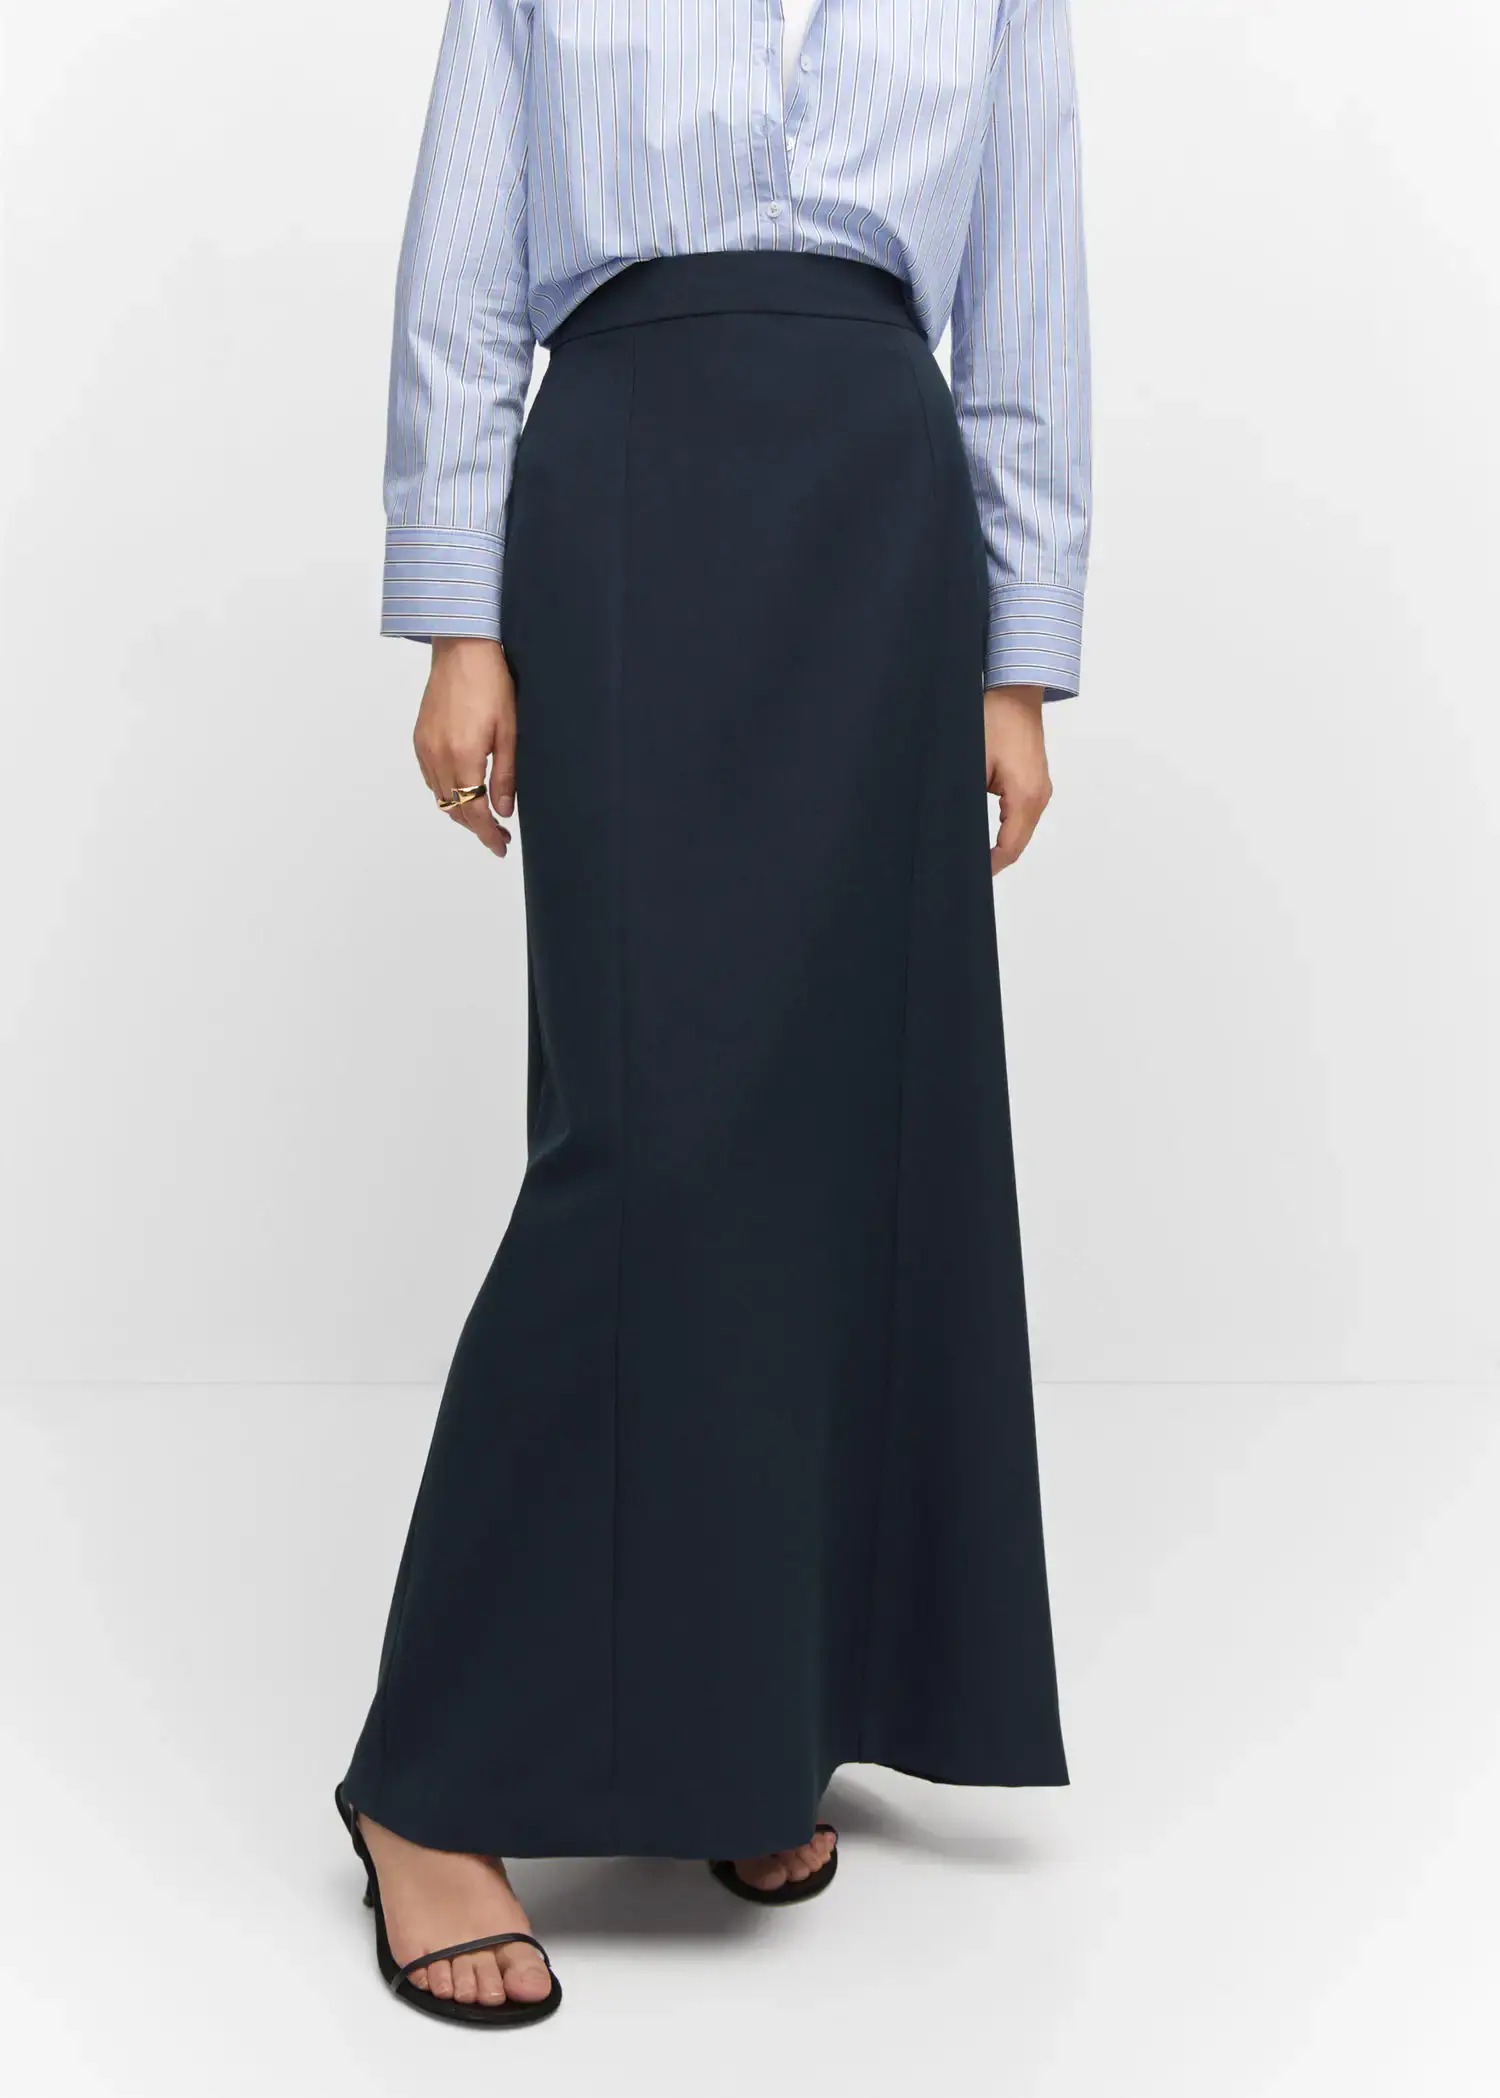 Mango Flowy long skirt. a woman wearing a long black skirt standing in front of a white wall. 